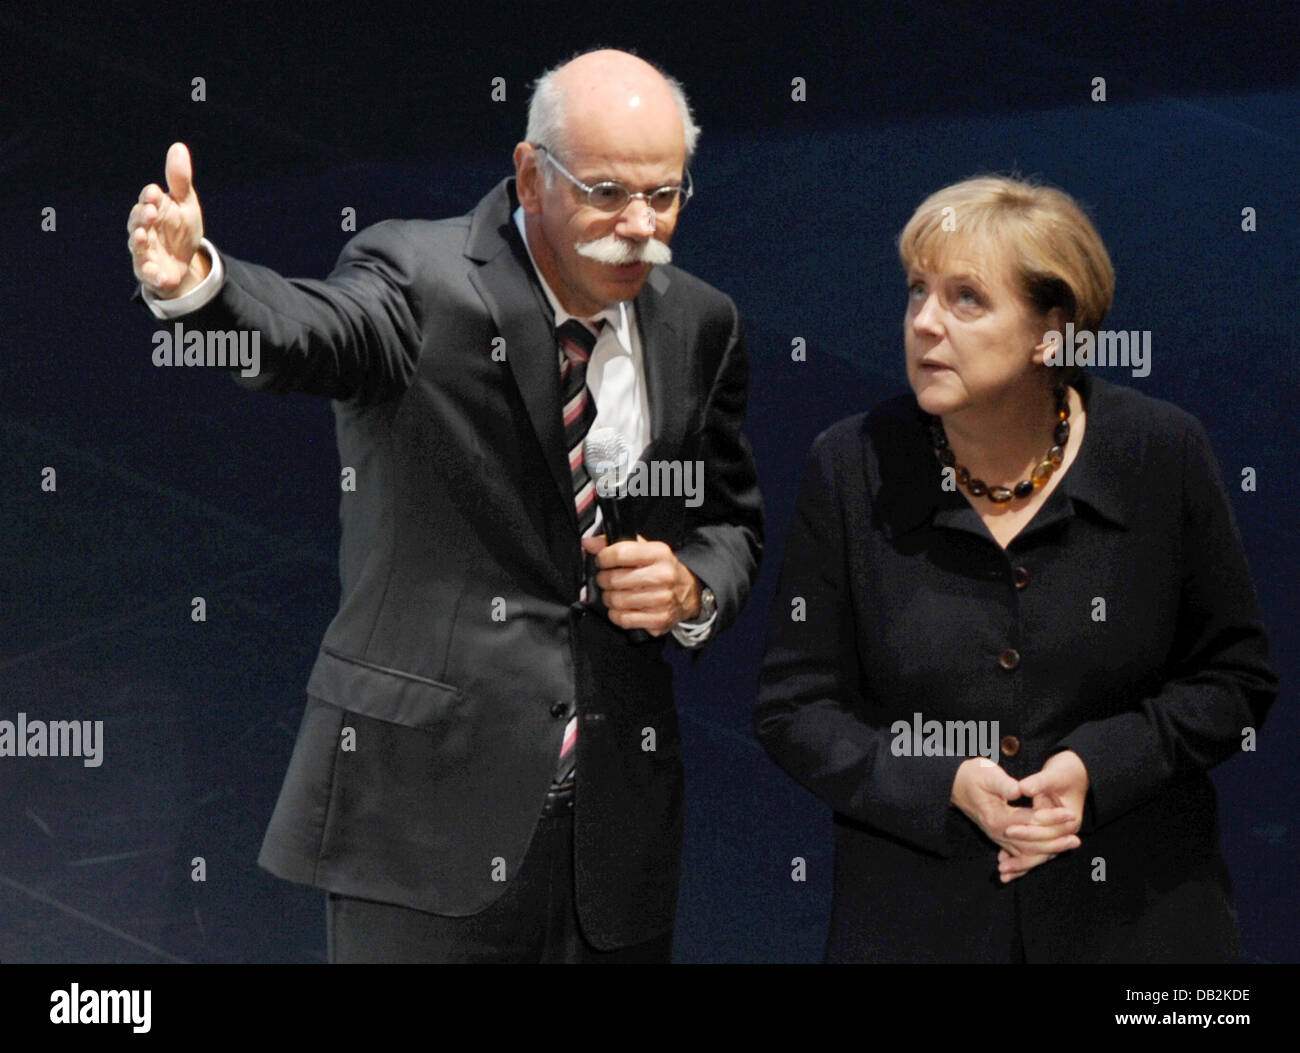 Dieter Zetsche (L), chairman of Daimler, speaks to German chancellor Angela Merkel inside the hall of Mercedes-Benz at the International Motor Show IAA in Frankfurt Main, Germany, 15 September 2011. From 15 to 25 September 2011 exhibitors from all over the world will present new trends of the automotive industry, headed by electronic mobility and hybrid vehicles. Photo: ARNE DEDERT Stock Photo